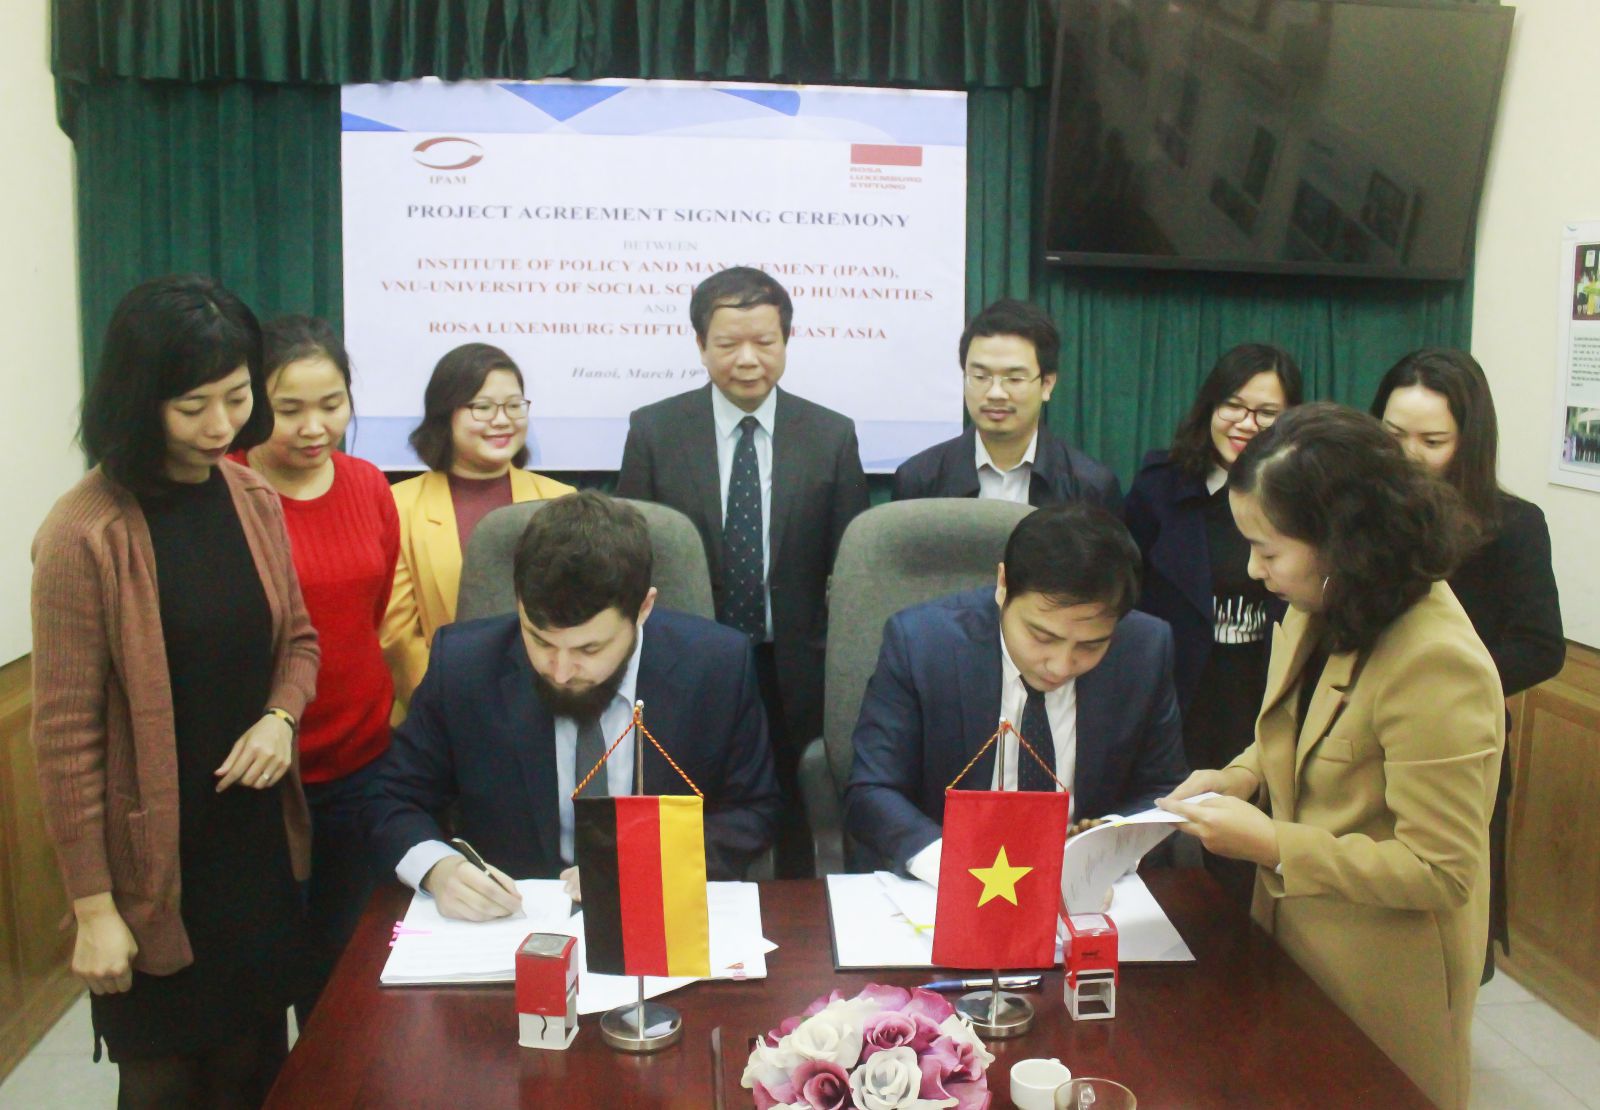 Project Agreement Signing Ceremony between IPAM and Rosa Luxemburg Stiftung Southeast Asia.